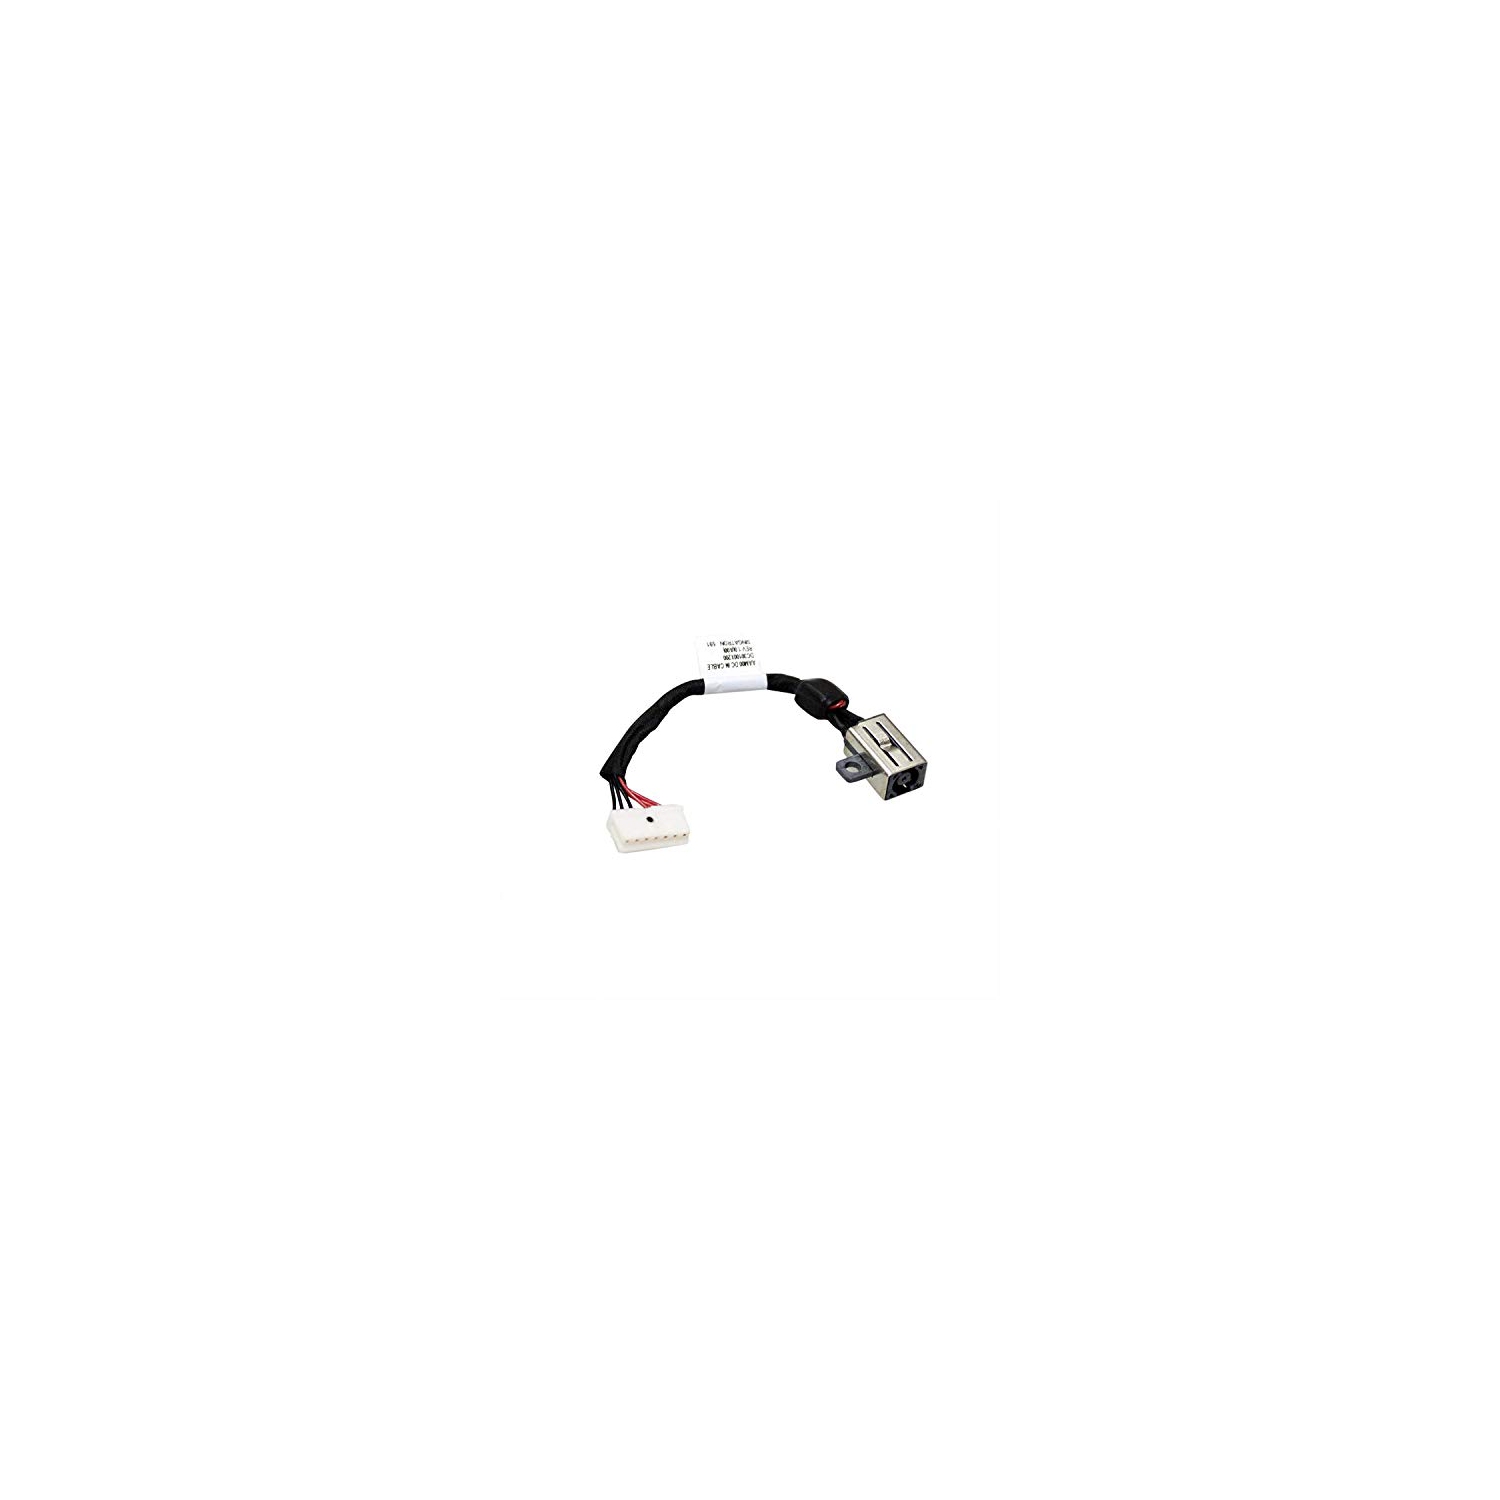 LaptopKing Replacement DC Power Jack Socket Charging Port Connector Plug Cable Harness for Dell XPS 15 9550-10 P56F 15 9560